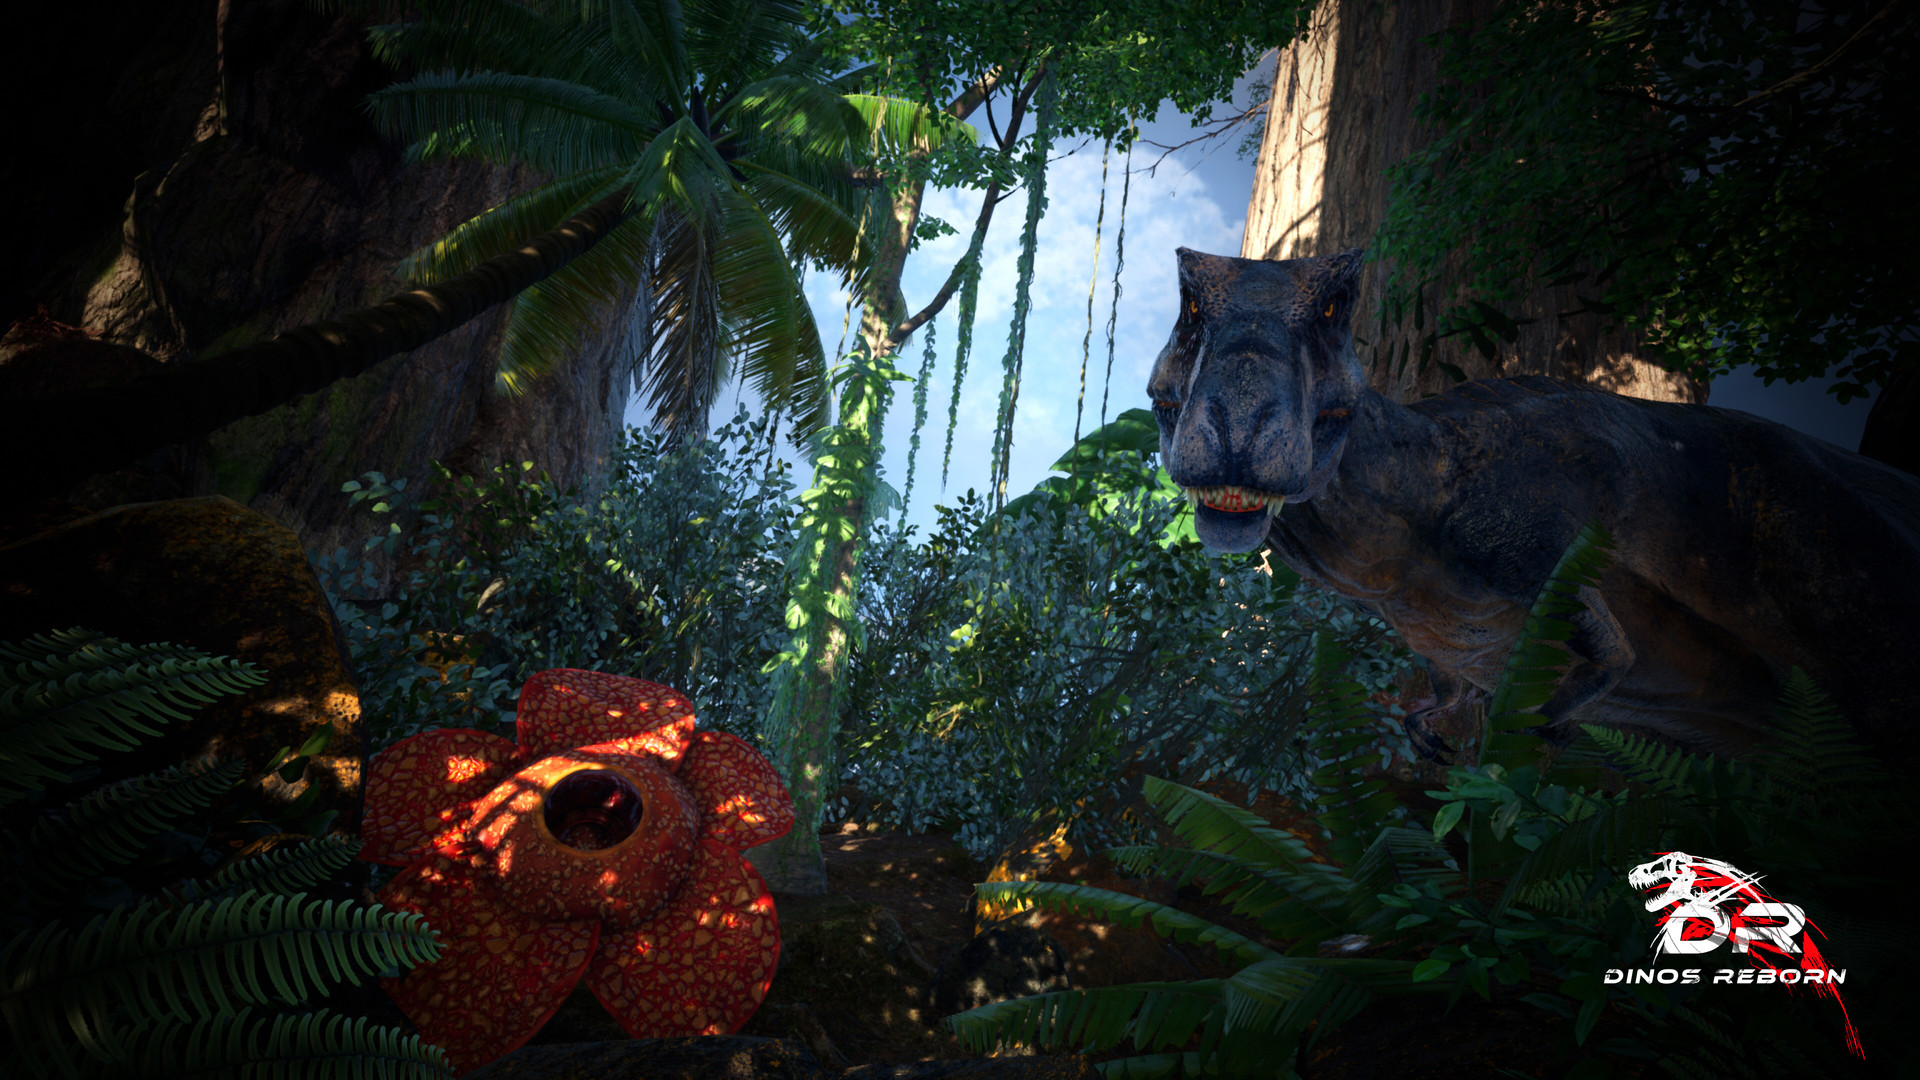 Dinos Reborn is Presented as a New Survival Show on Xbox